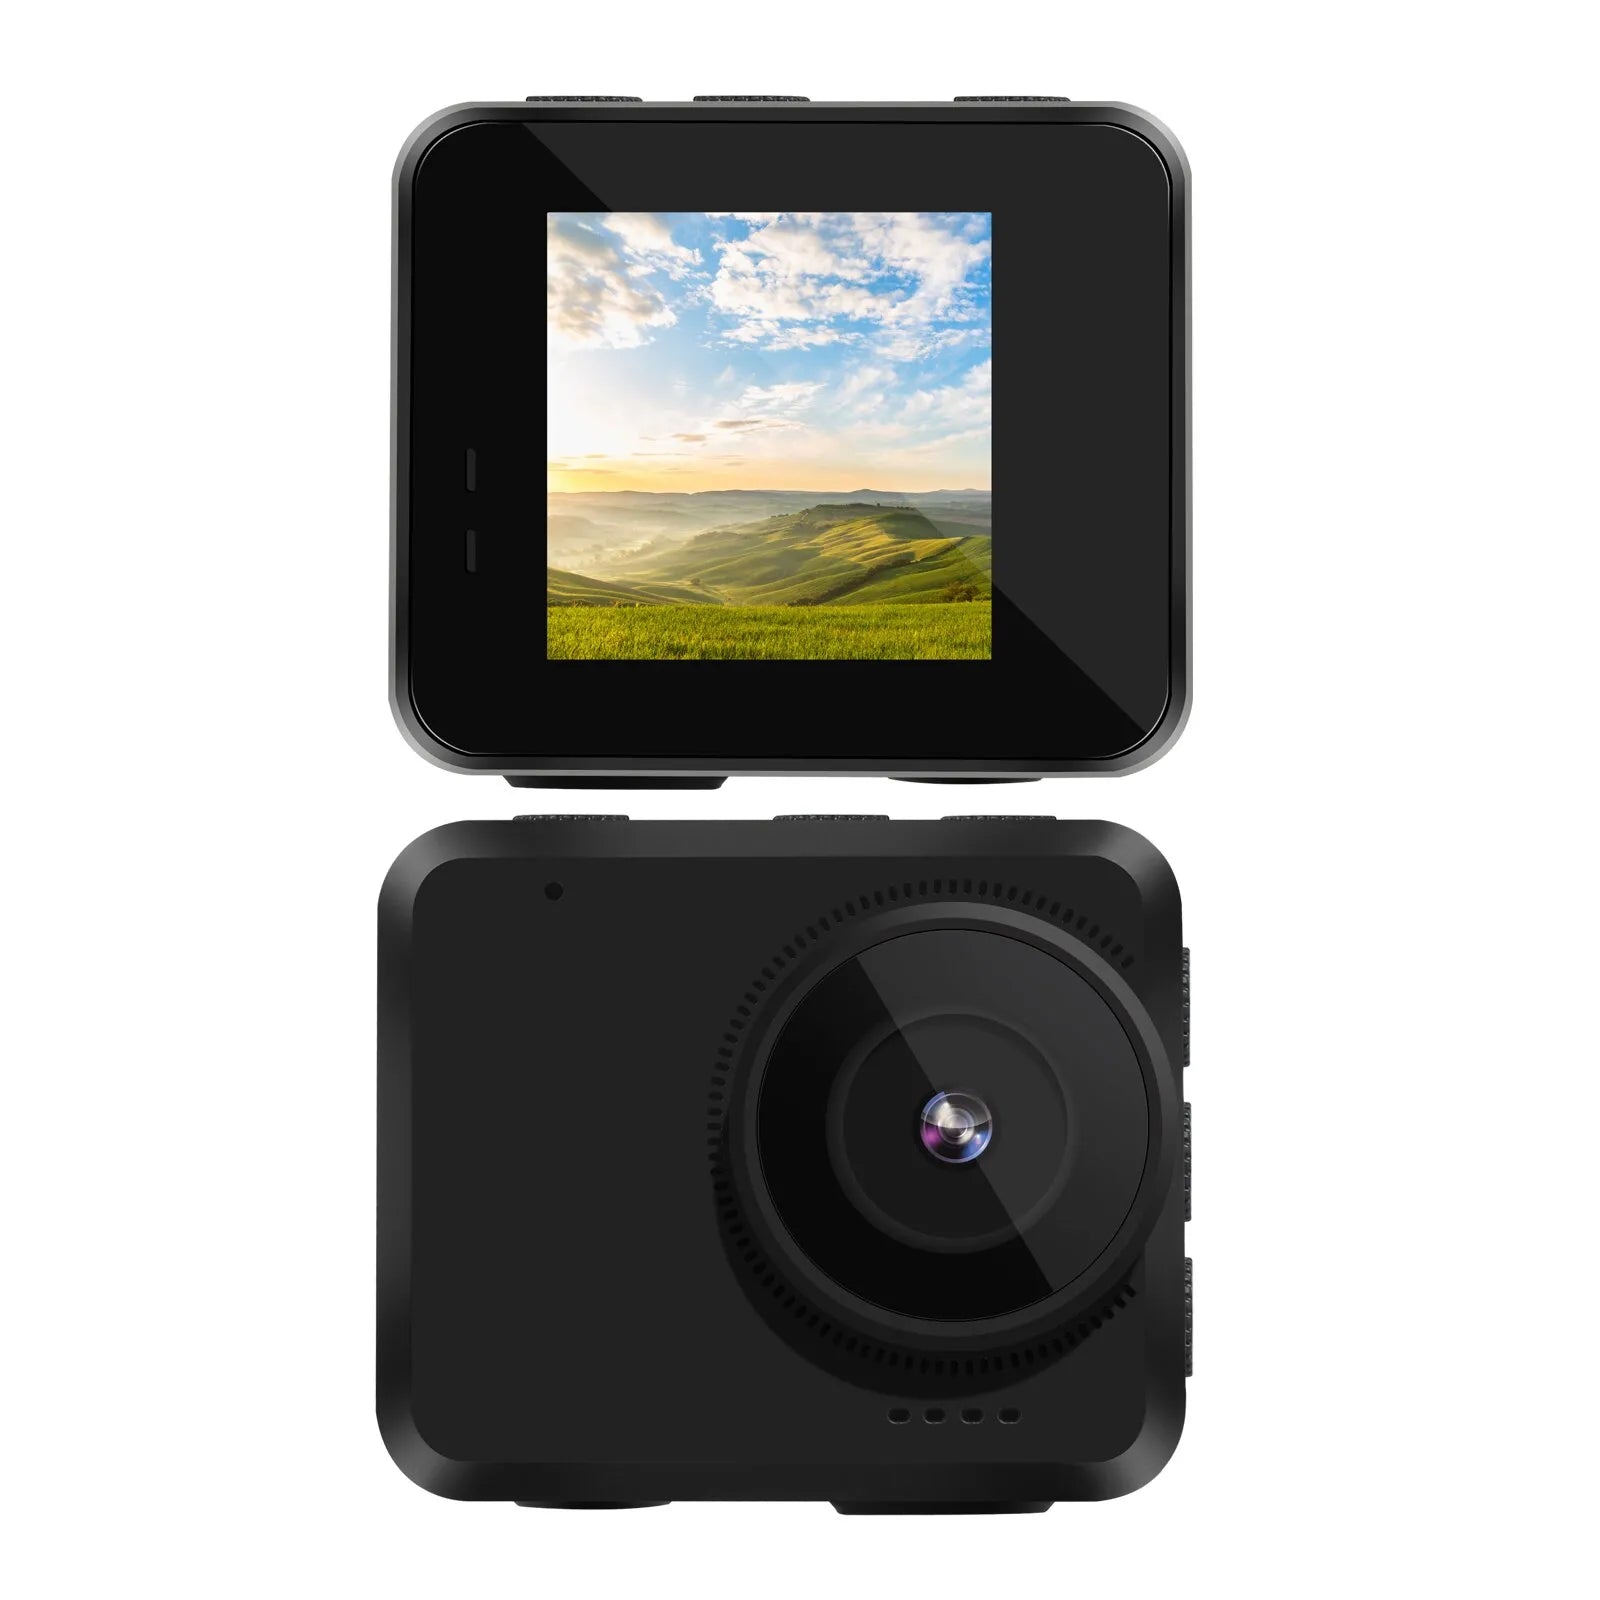 A35 64GB Digital Mini Camera Sports DV Webcam 600mAH Motor Bicycle Action Video Recording Motion Detection for Car Driving Ride